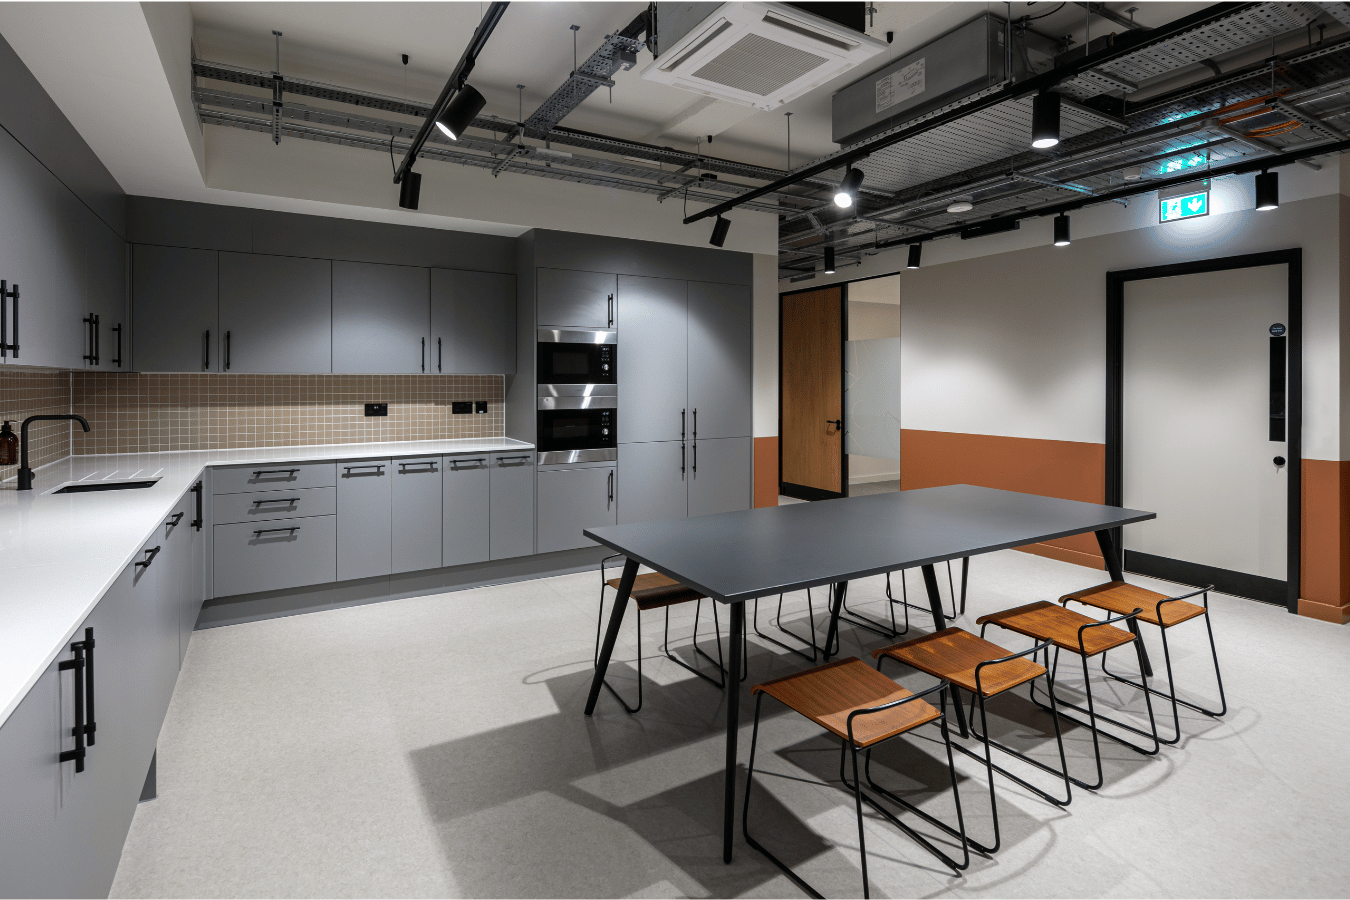 Modern work canteen with kitchen, seats and a bench